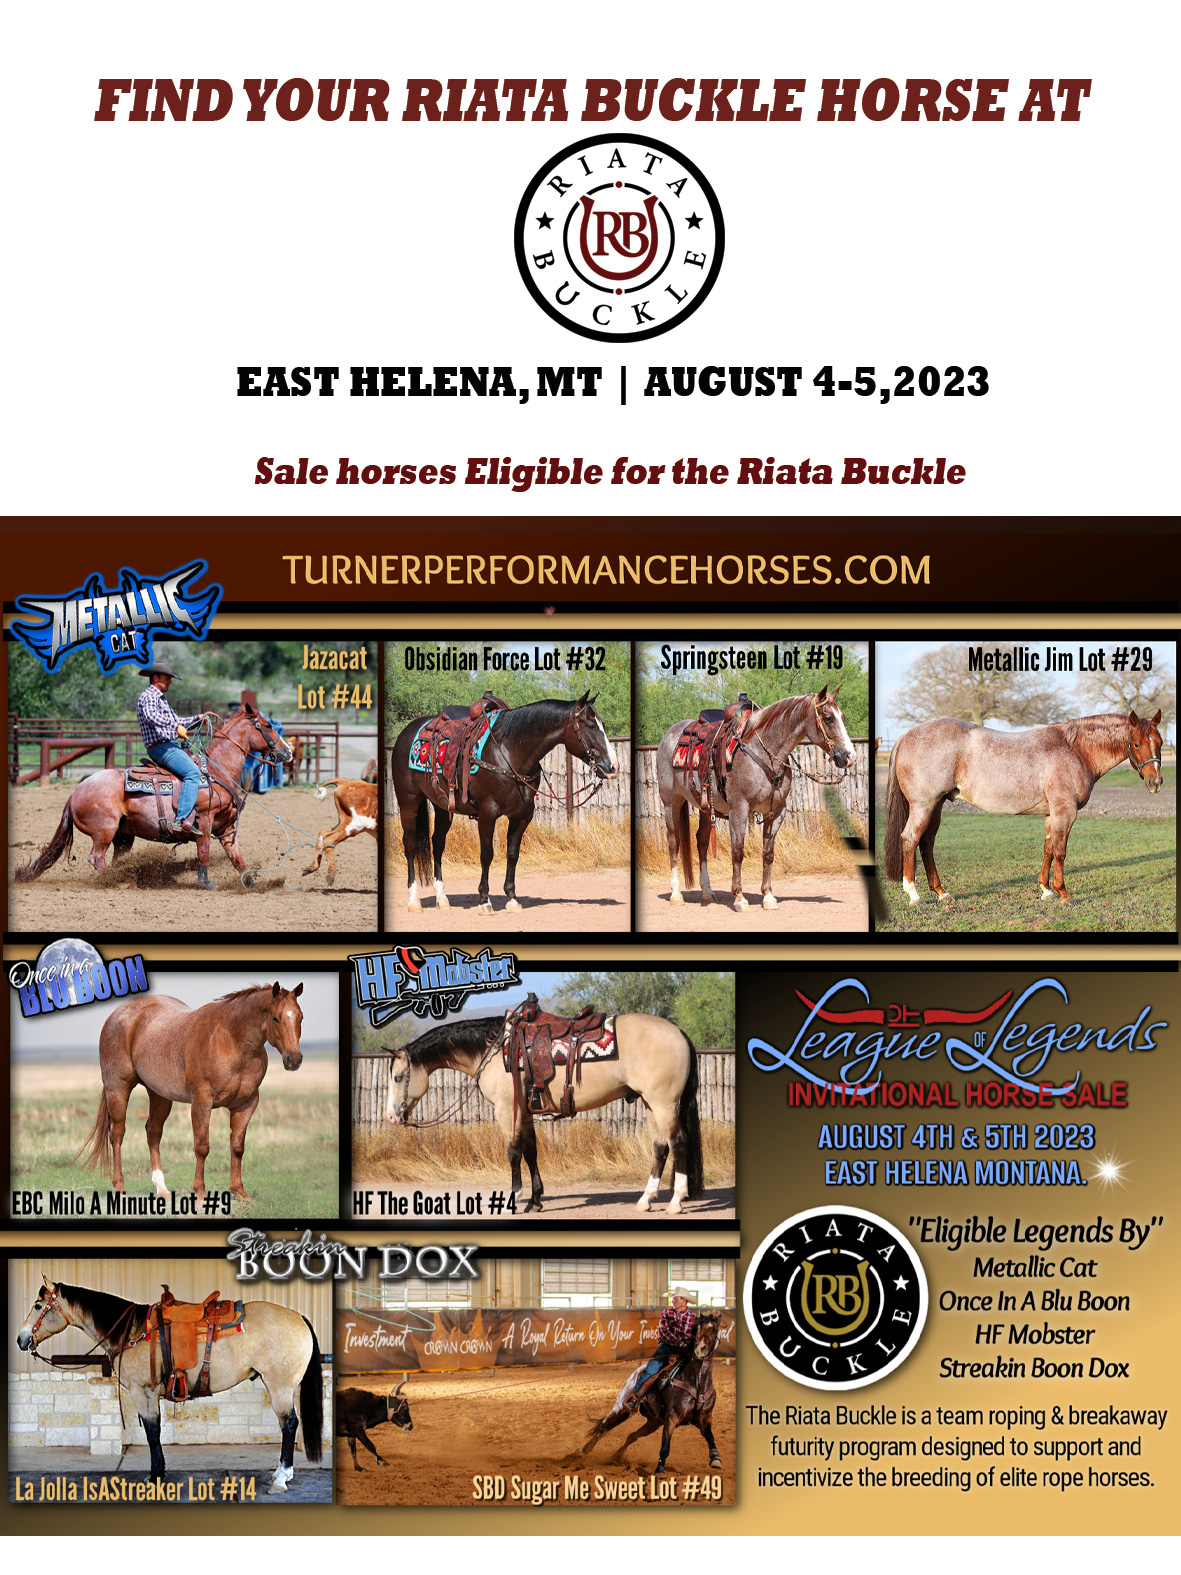 Event Ad for Turner Performance Horse Sale